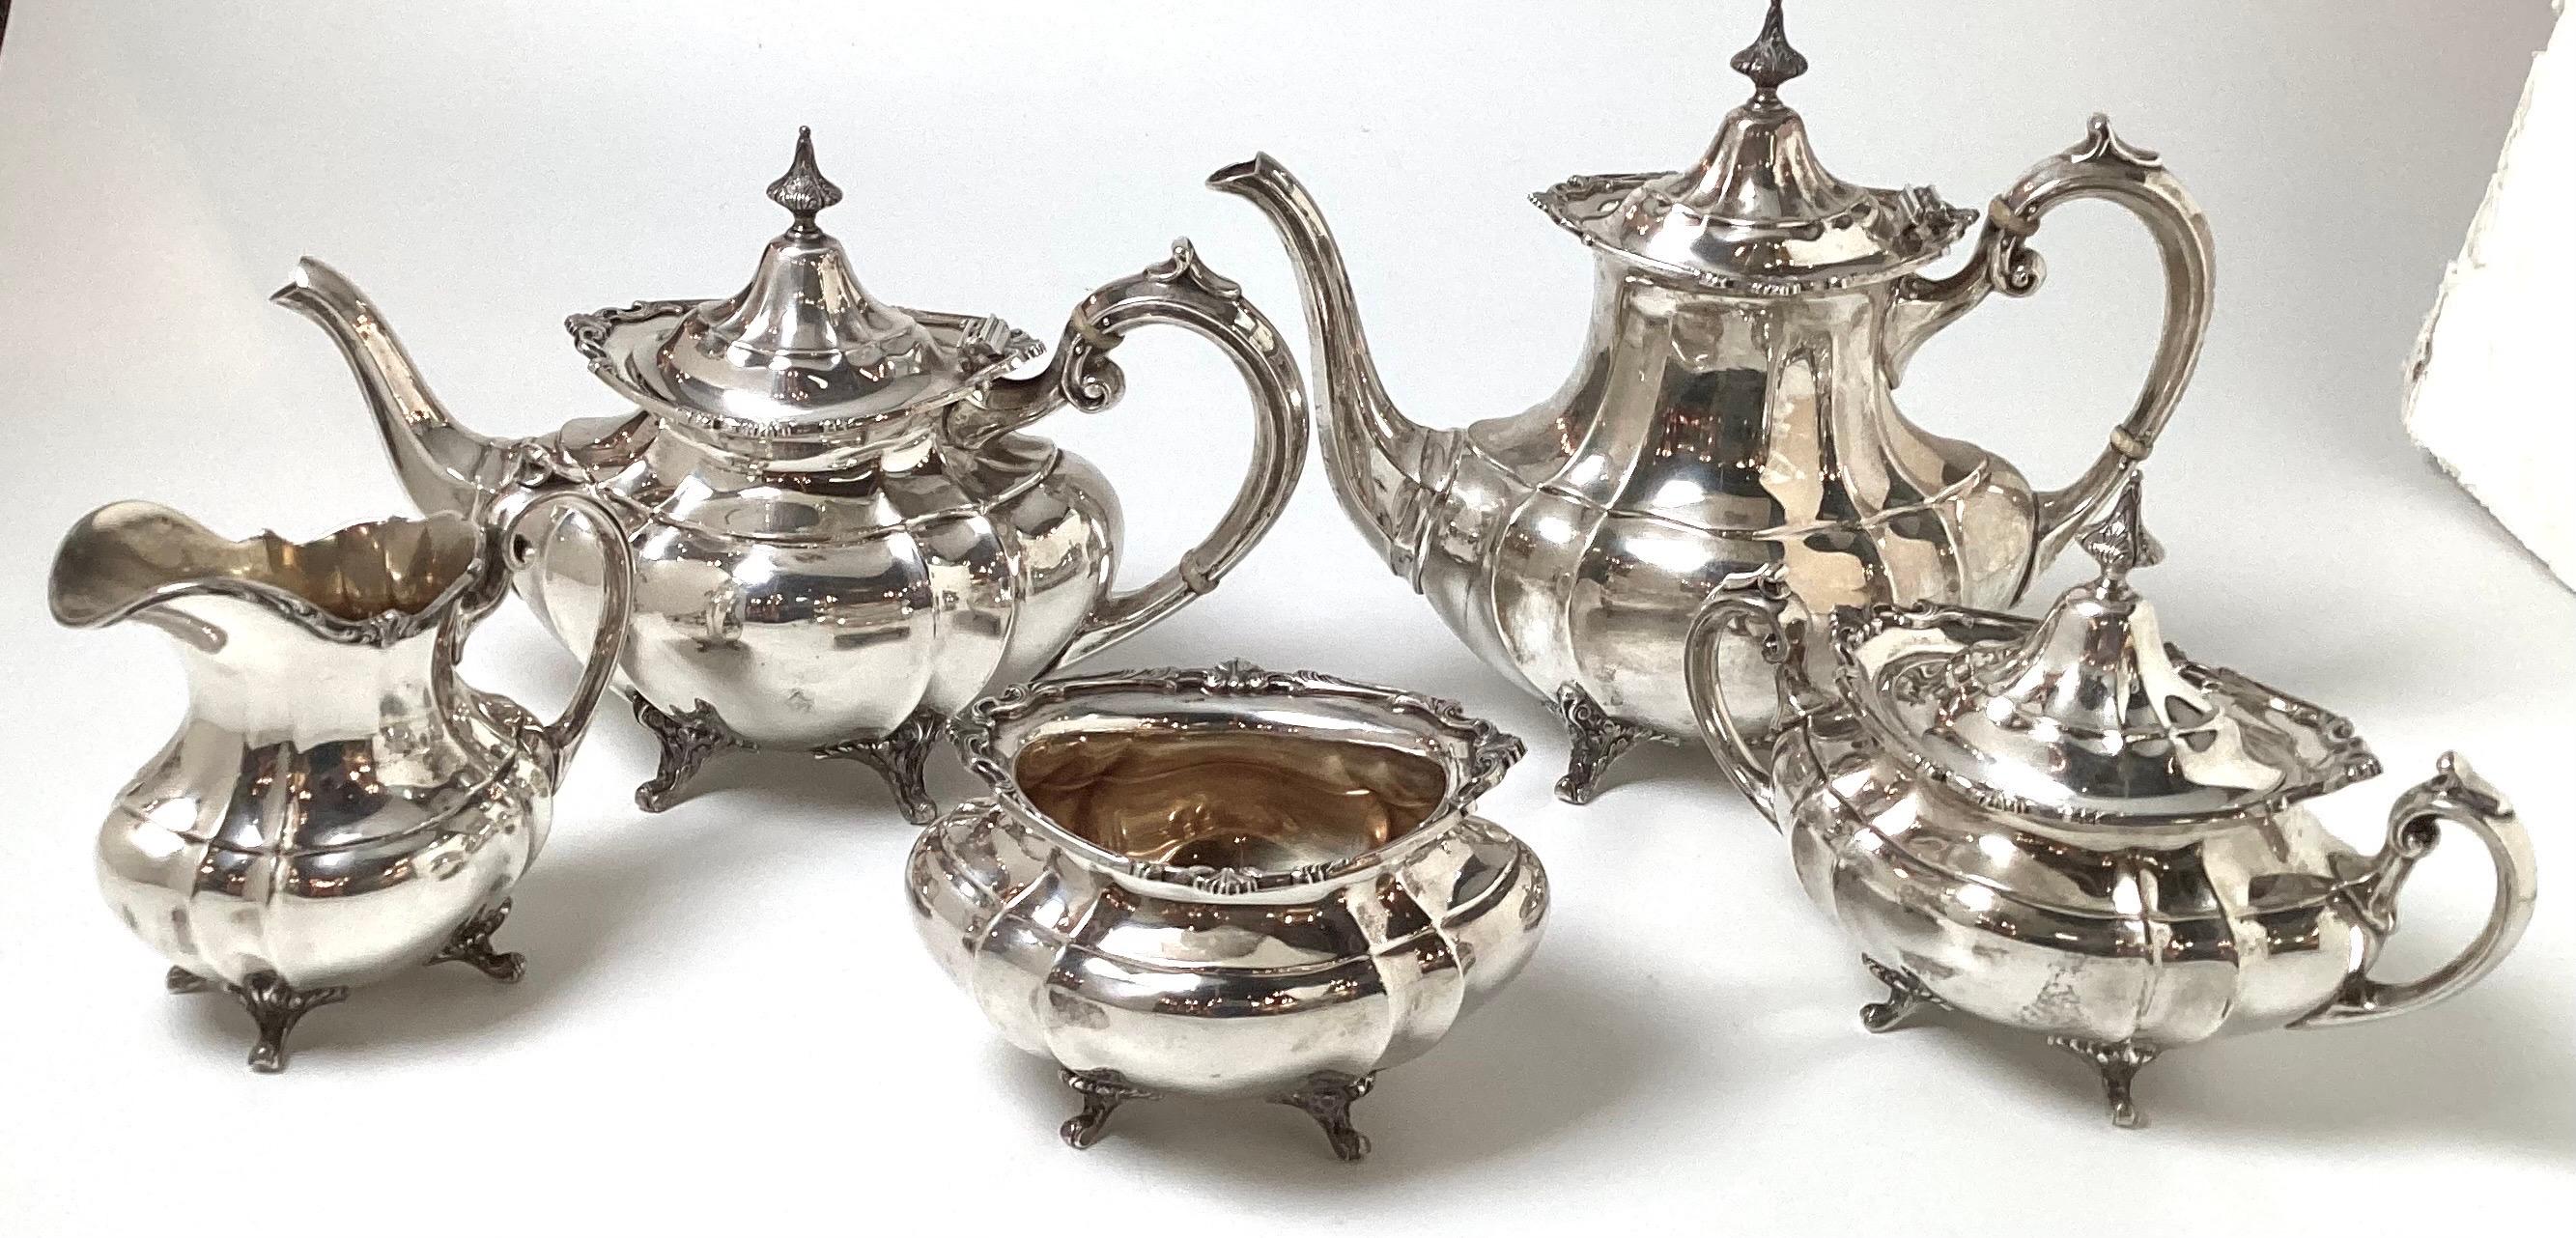 An Elegant pure sterling silver Hampton Court pattern 5 pc tea set by Reed and Barton.  The set consists of a coffee pot at 9 inches high, the teapot at 10 inches high, the covered sugar bowl at 8 inches high, the creamer 7.5 inches high and the